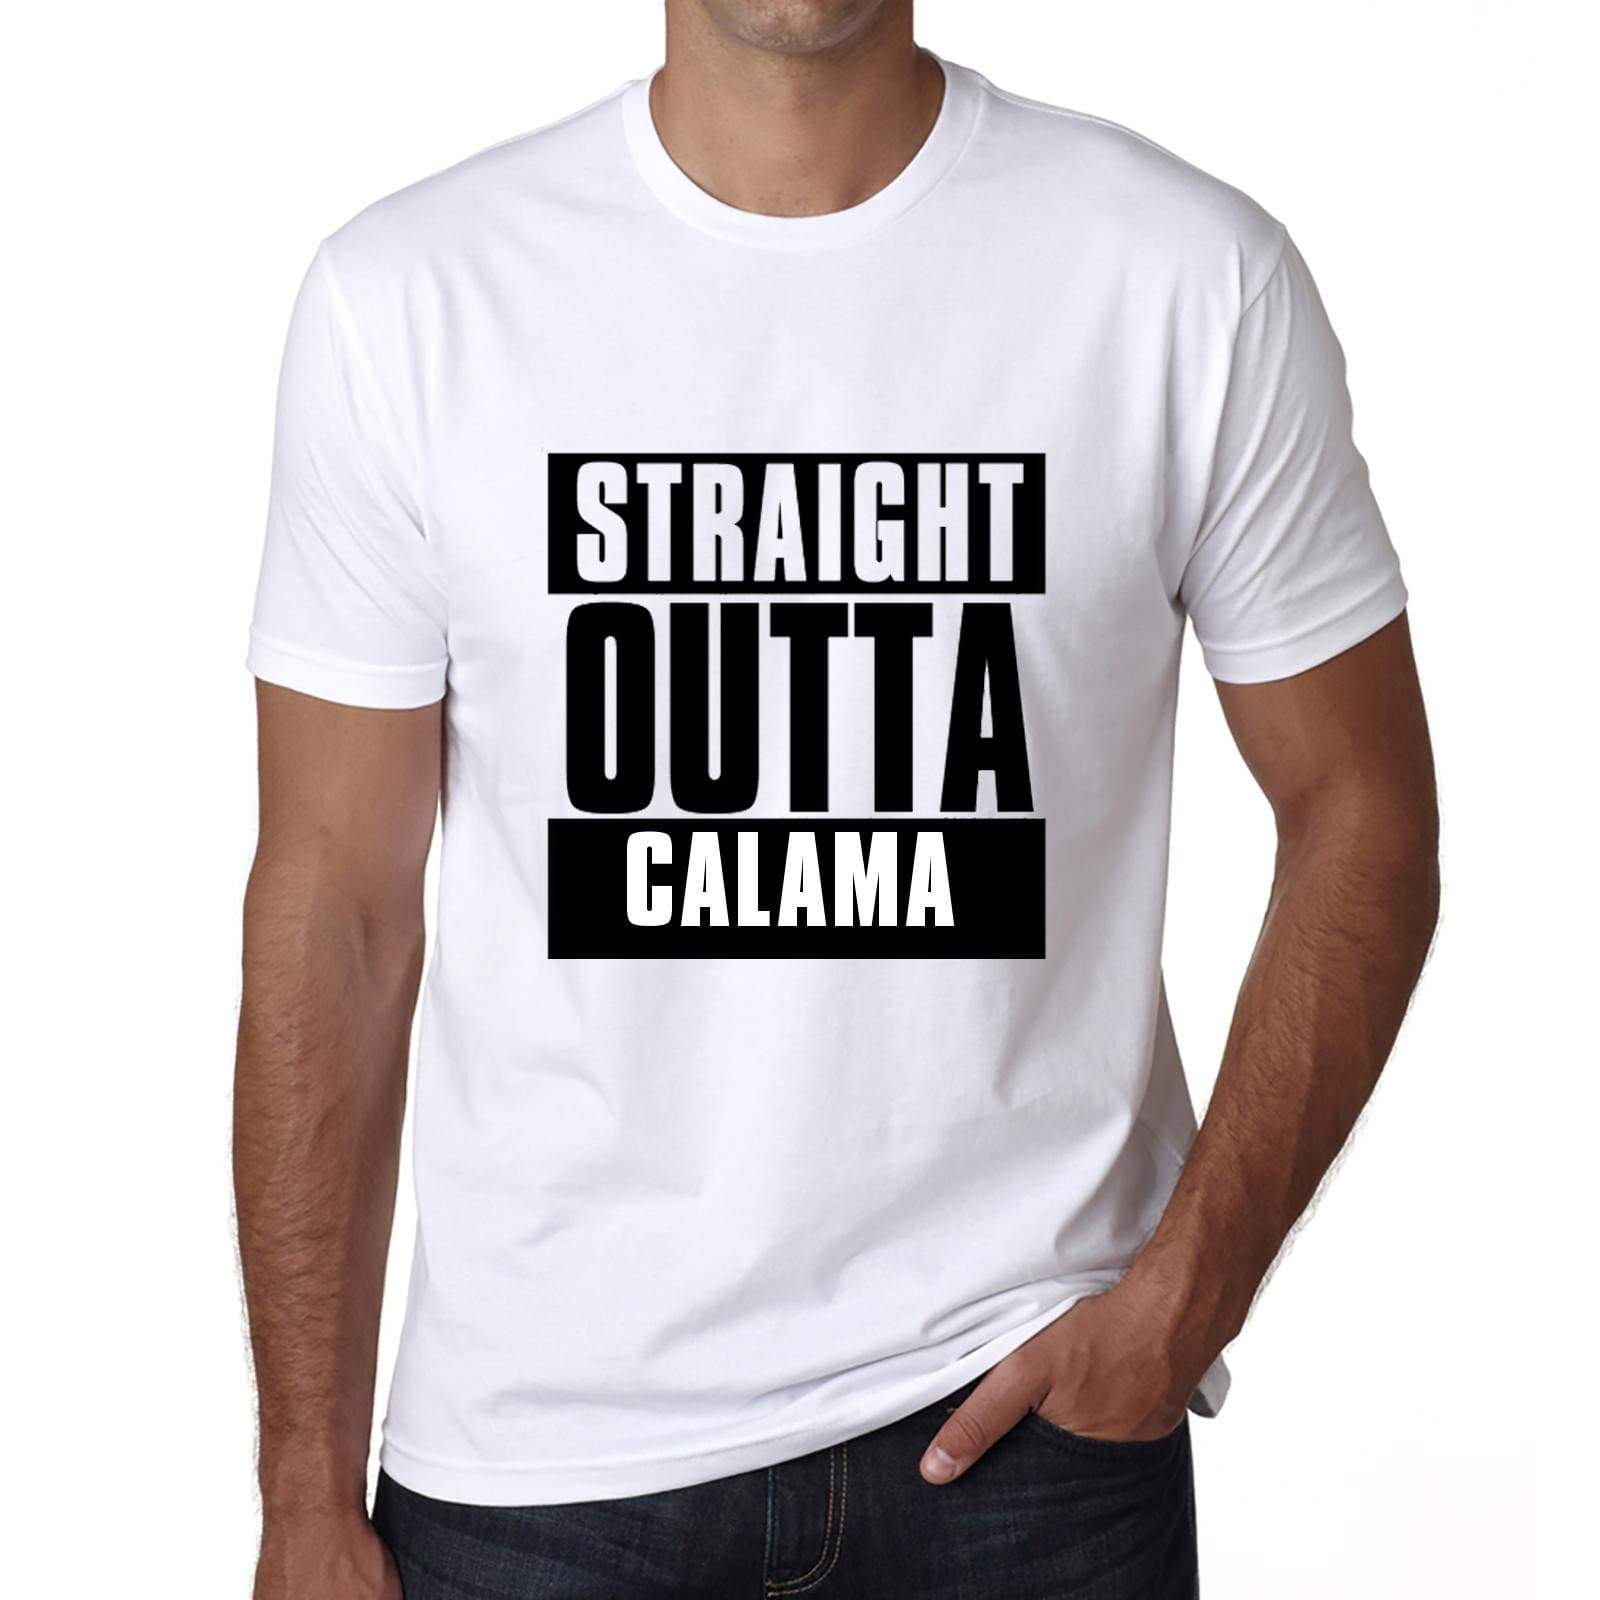 Straight Outta Calama Mens Short Sleeve Round Neck T-Shirt 00027 - White / S - Casual